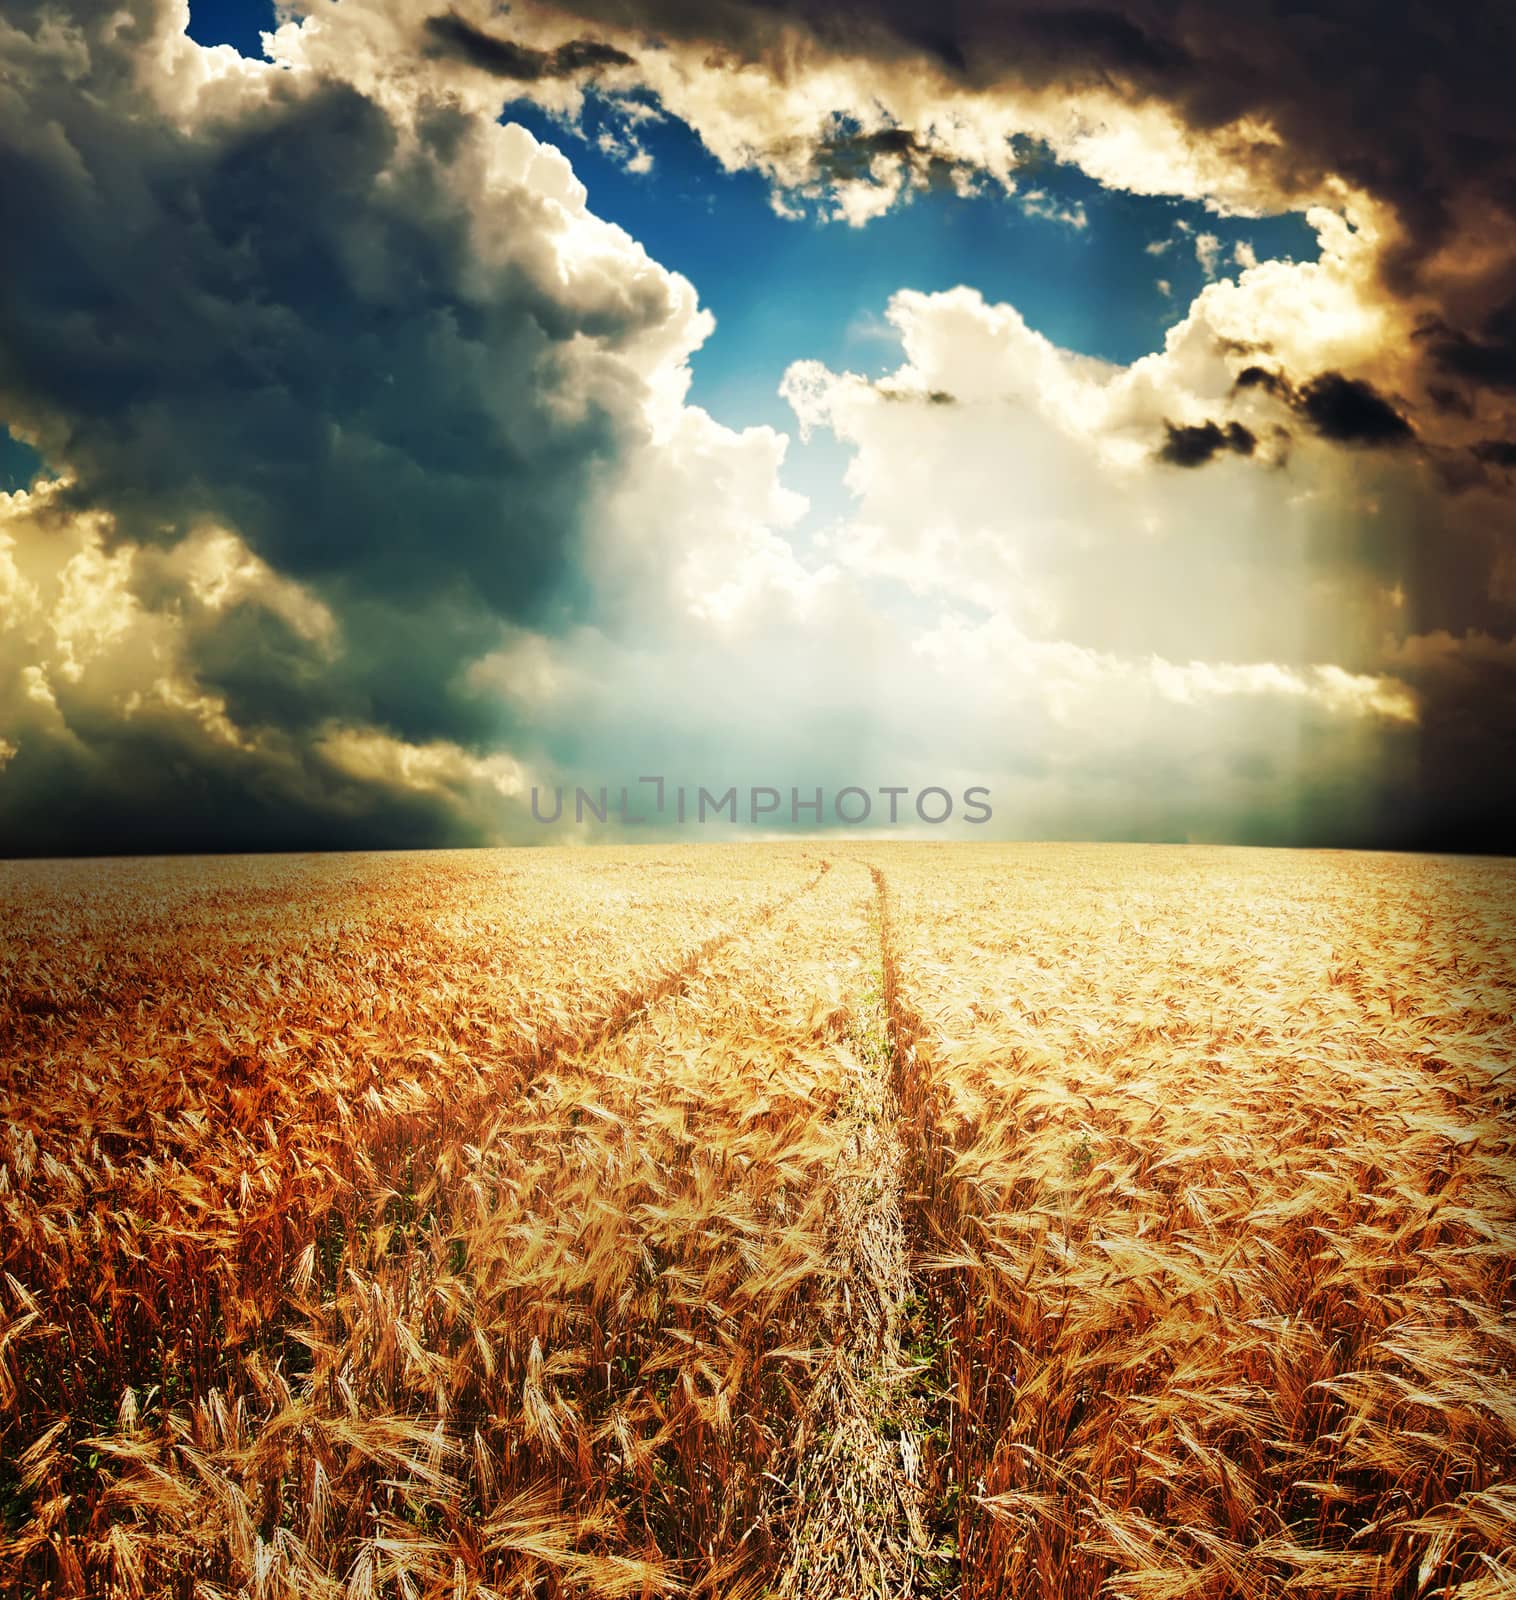 road in field with gold ears of wheat under sunrays